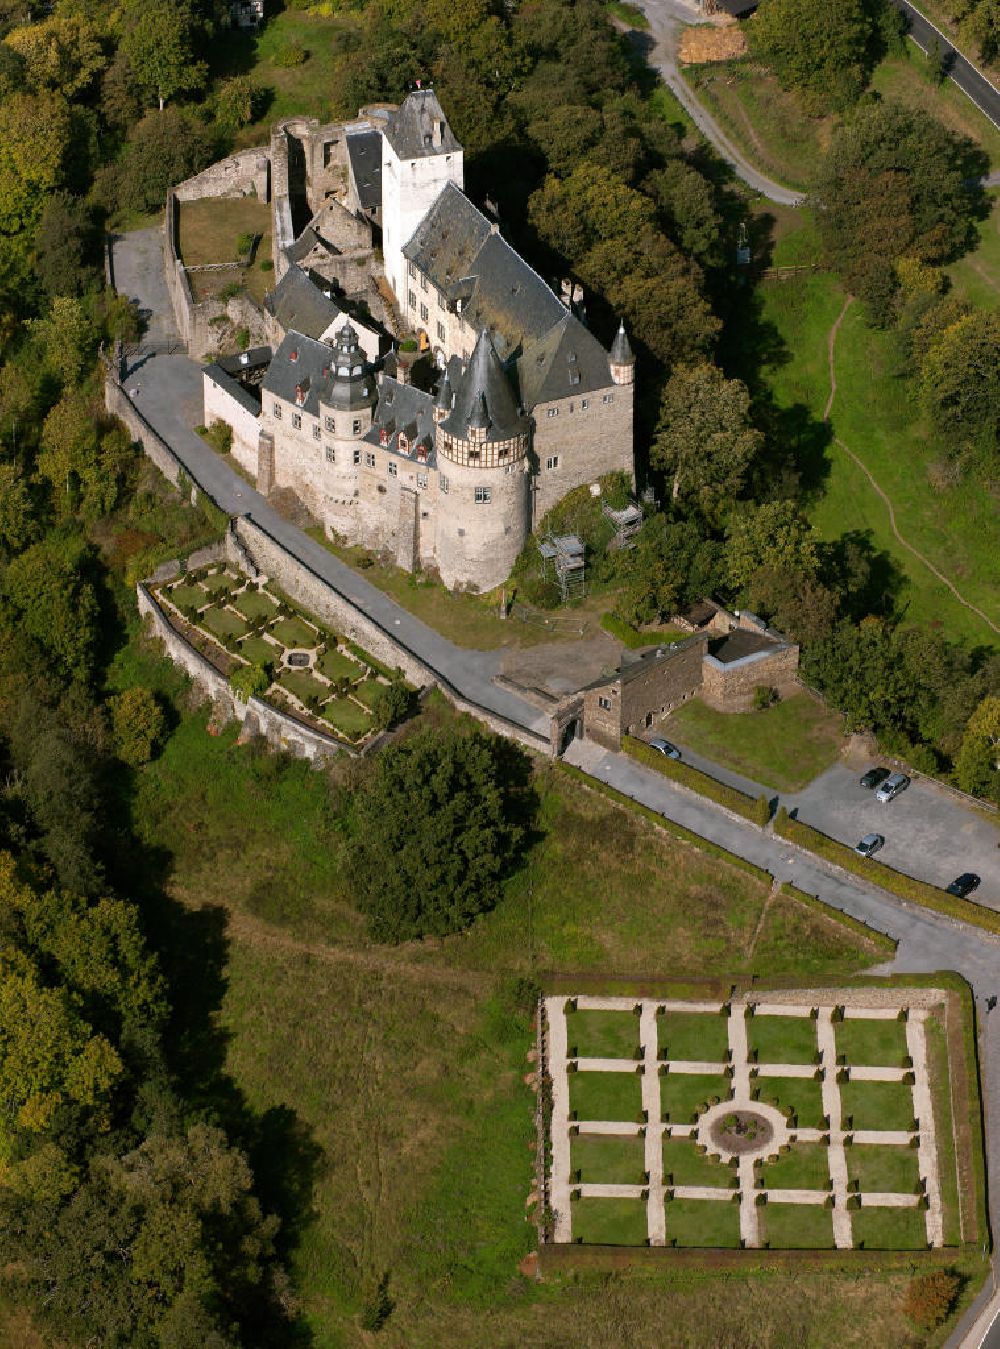 Aerial photograph Mayen - The castle Bürresheim stands in the Northwest of Mayen on a rocky outcrop in Nettetal. Bürresheim was built in the 12th century by its then owners, the noble and free Eberhard Mettfried. Today it is open for tours